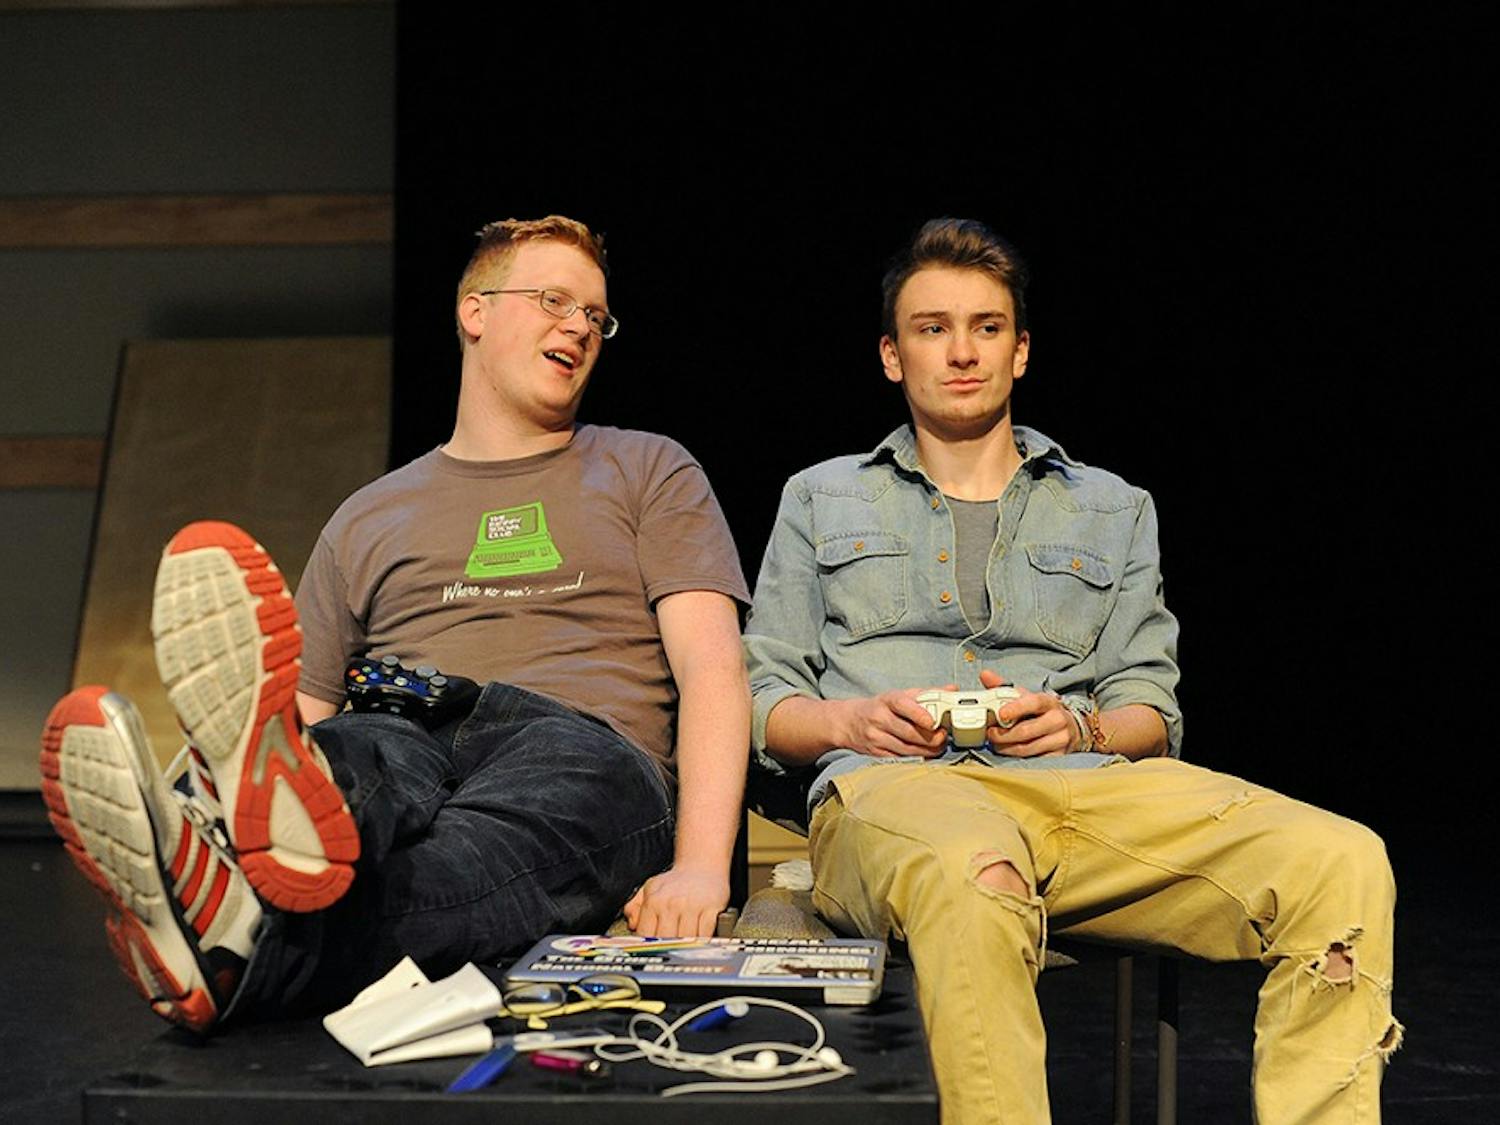 Sophomore Noah Leiberman playing the role of Same and Junior exchange student Cameron Stuart playing the role of Jack and rehearse for the upcoming performance of Mark Andrew Taylor's 'Snow Days' at Kenan Theater on Wednesday night. "I went to a boarding school and the play definitely captures the feeling of boarding school," said Leiberman. "I can relate." 